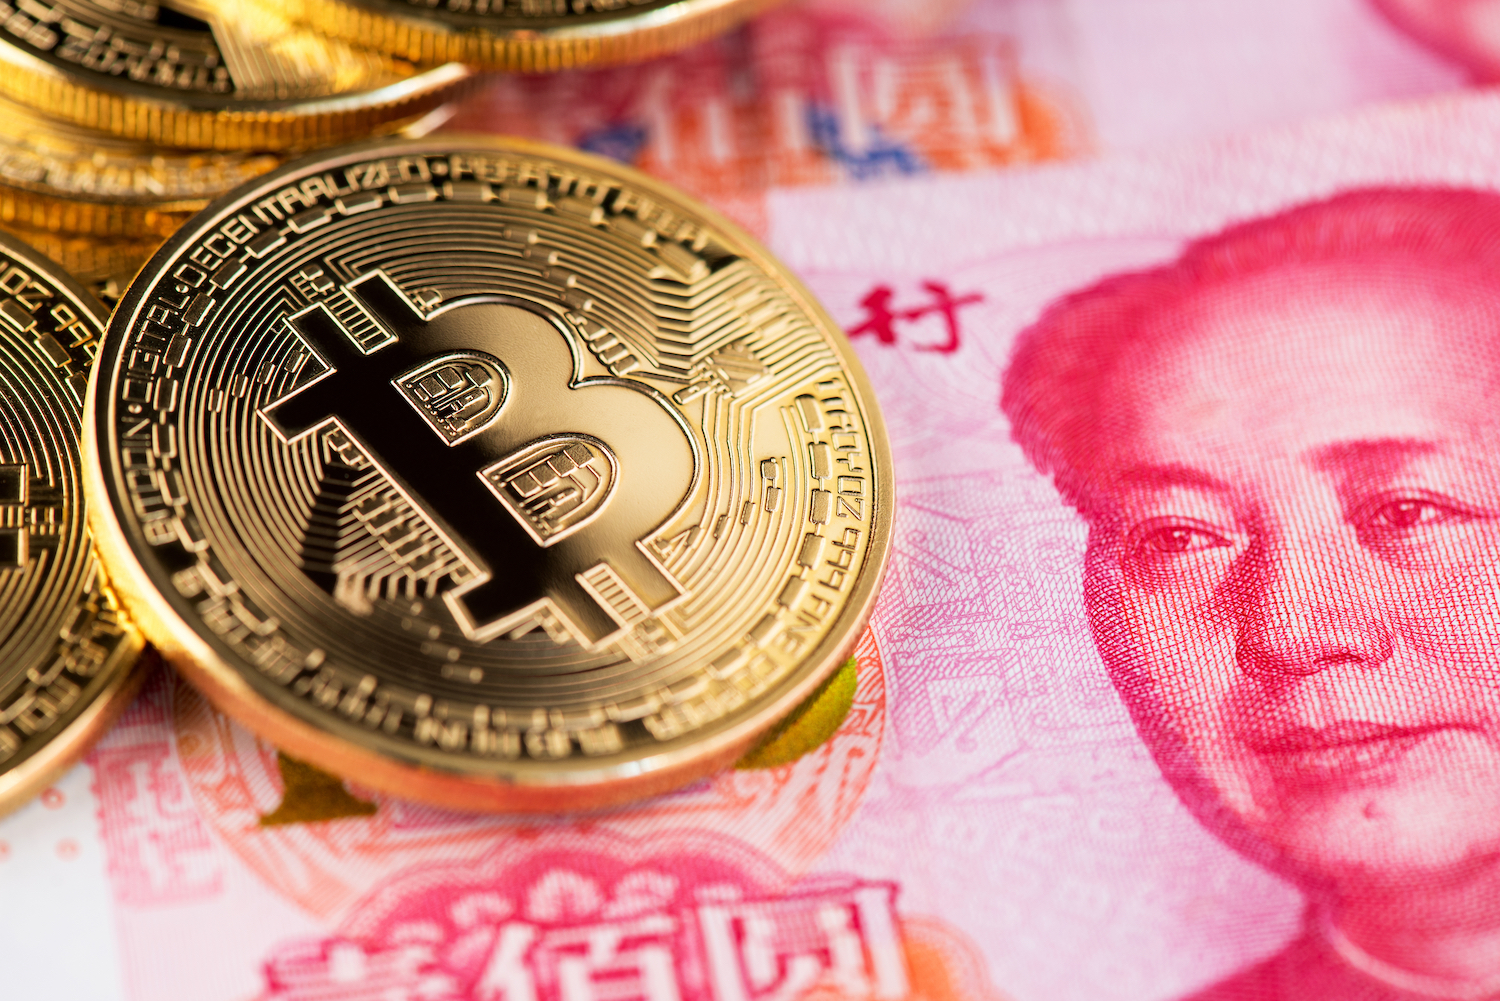 China Scraps Plan To Categorize Bitcoin Mining As Industry To Be Eliminated